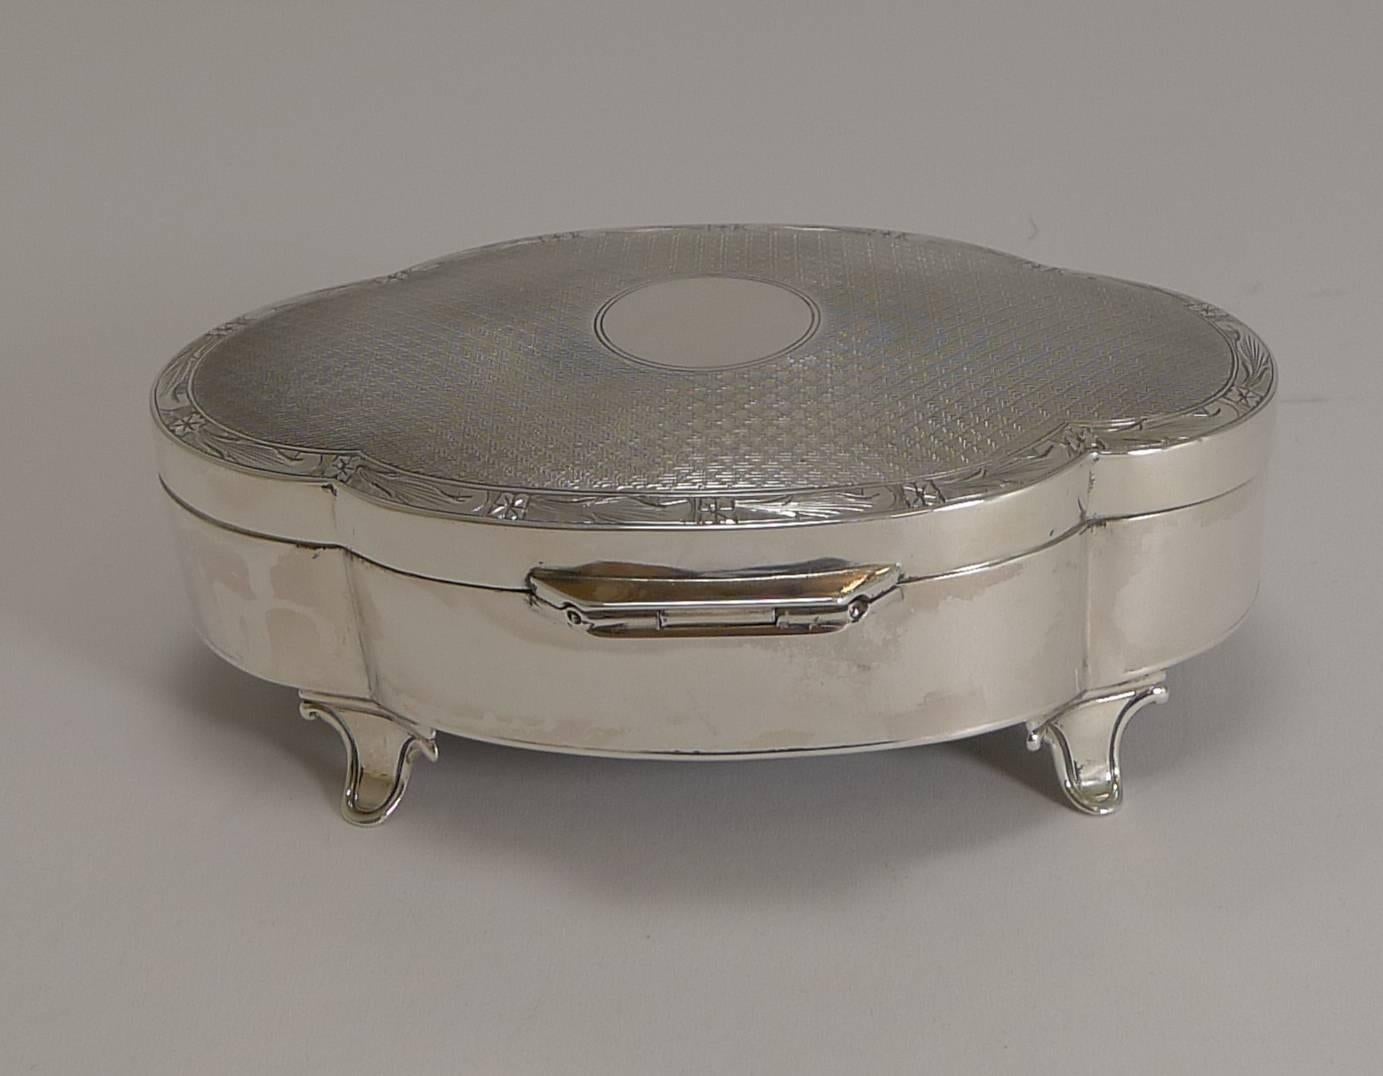 Art Deco Antique English Sterling Silver Jewelry Box by Goldsmiths and Silversmiths Co